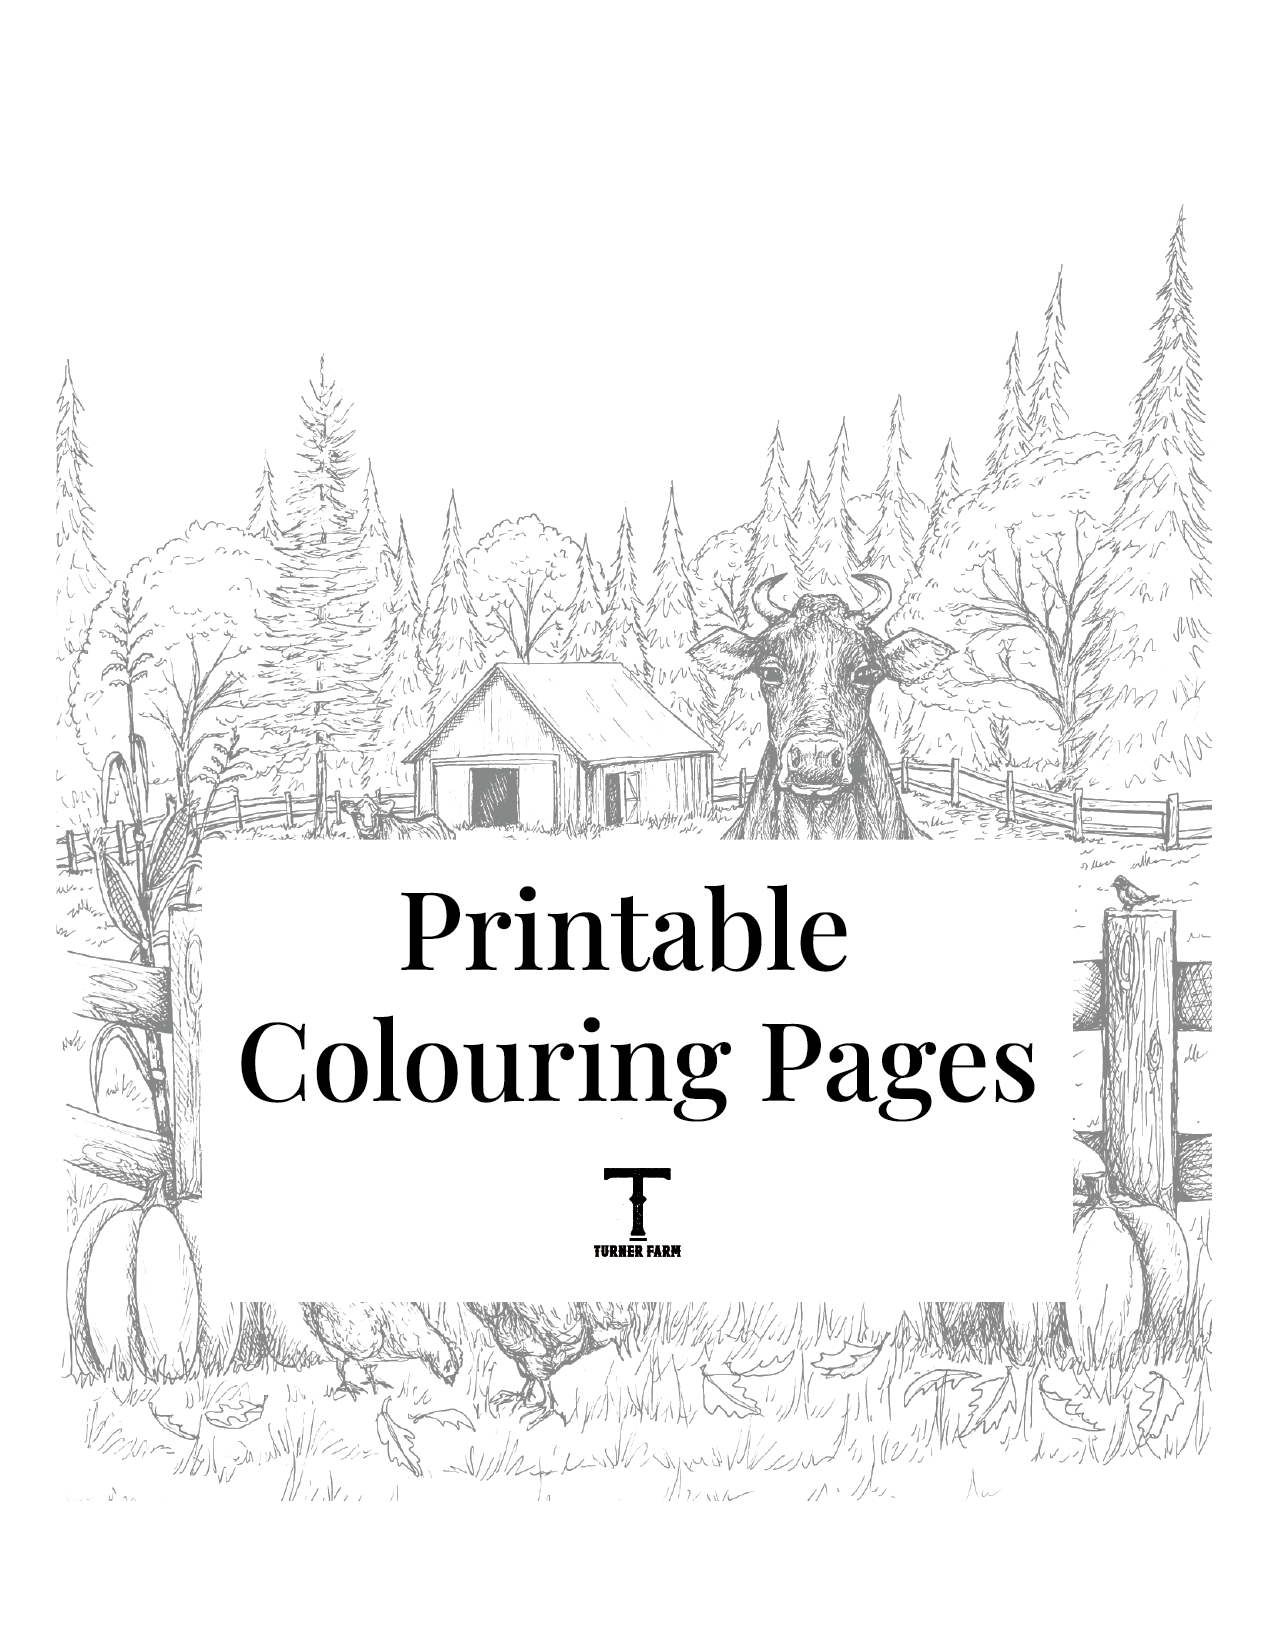 Coming Soon - Printable Colouring Pages